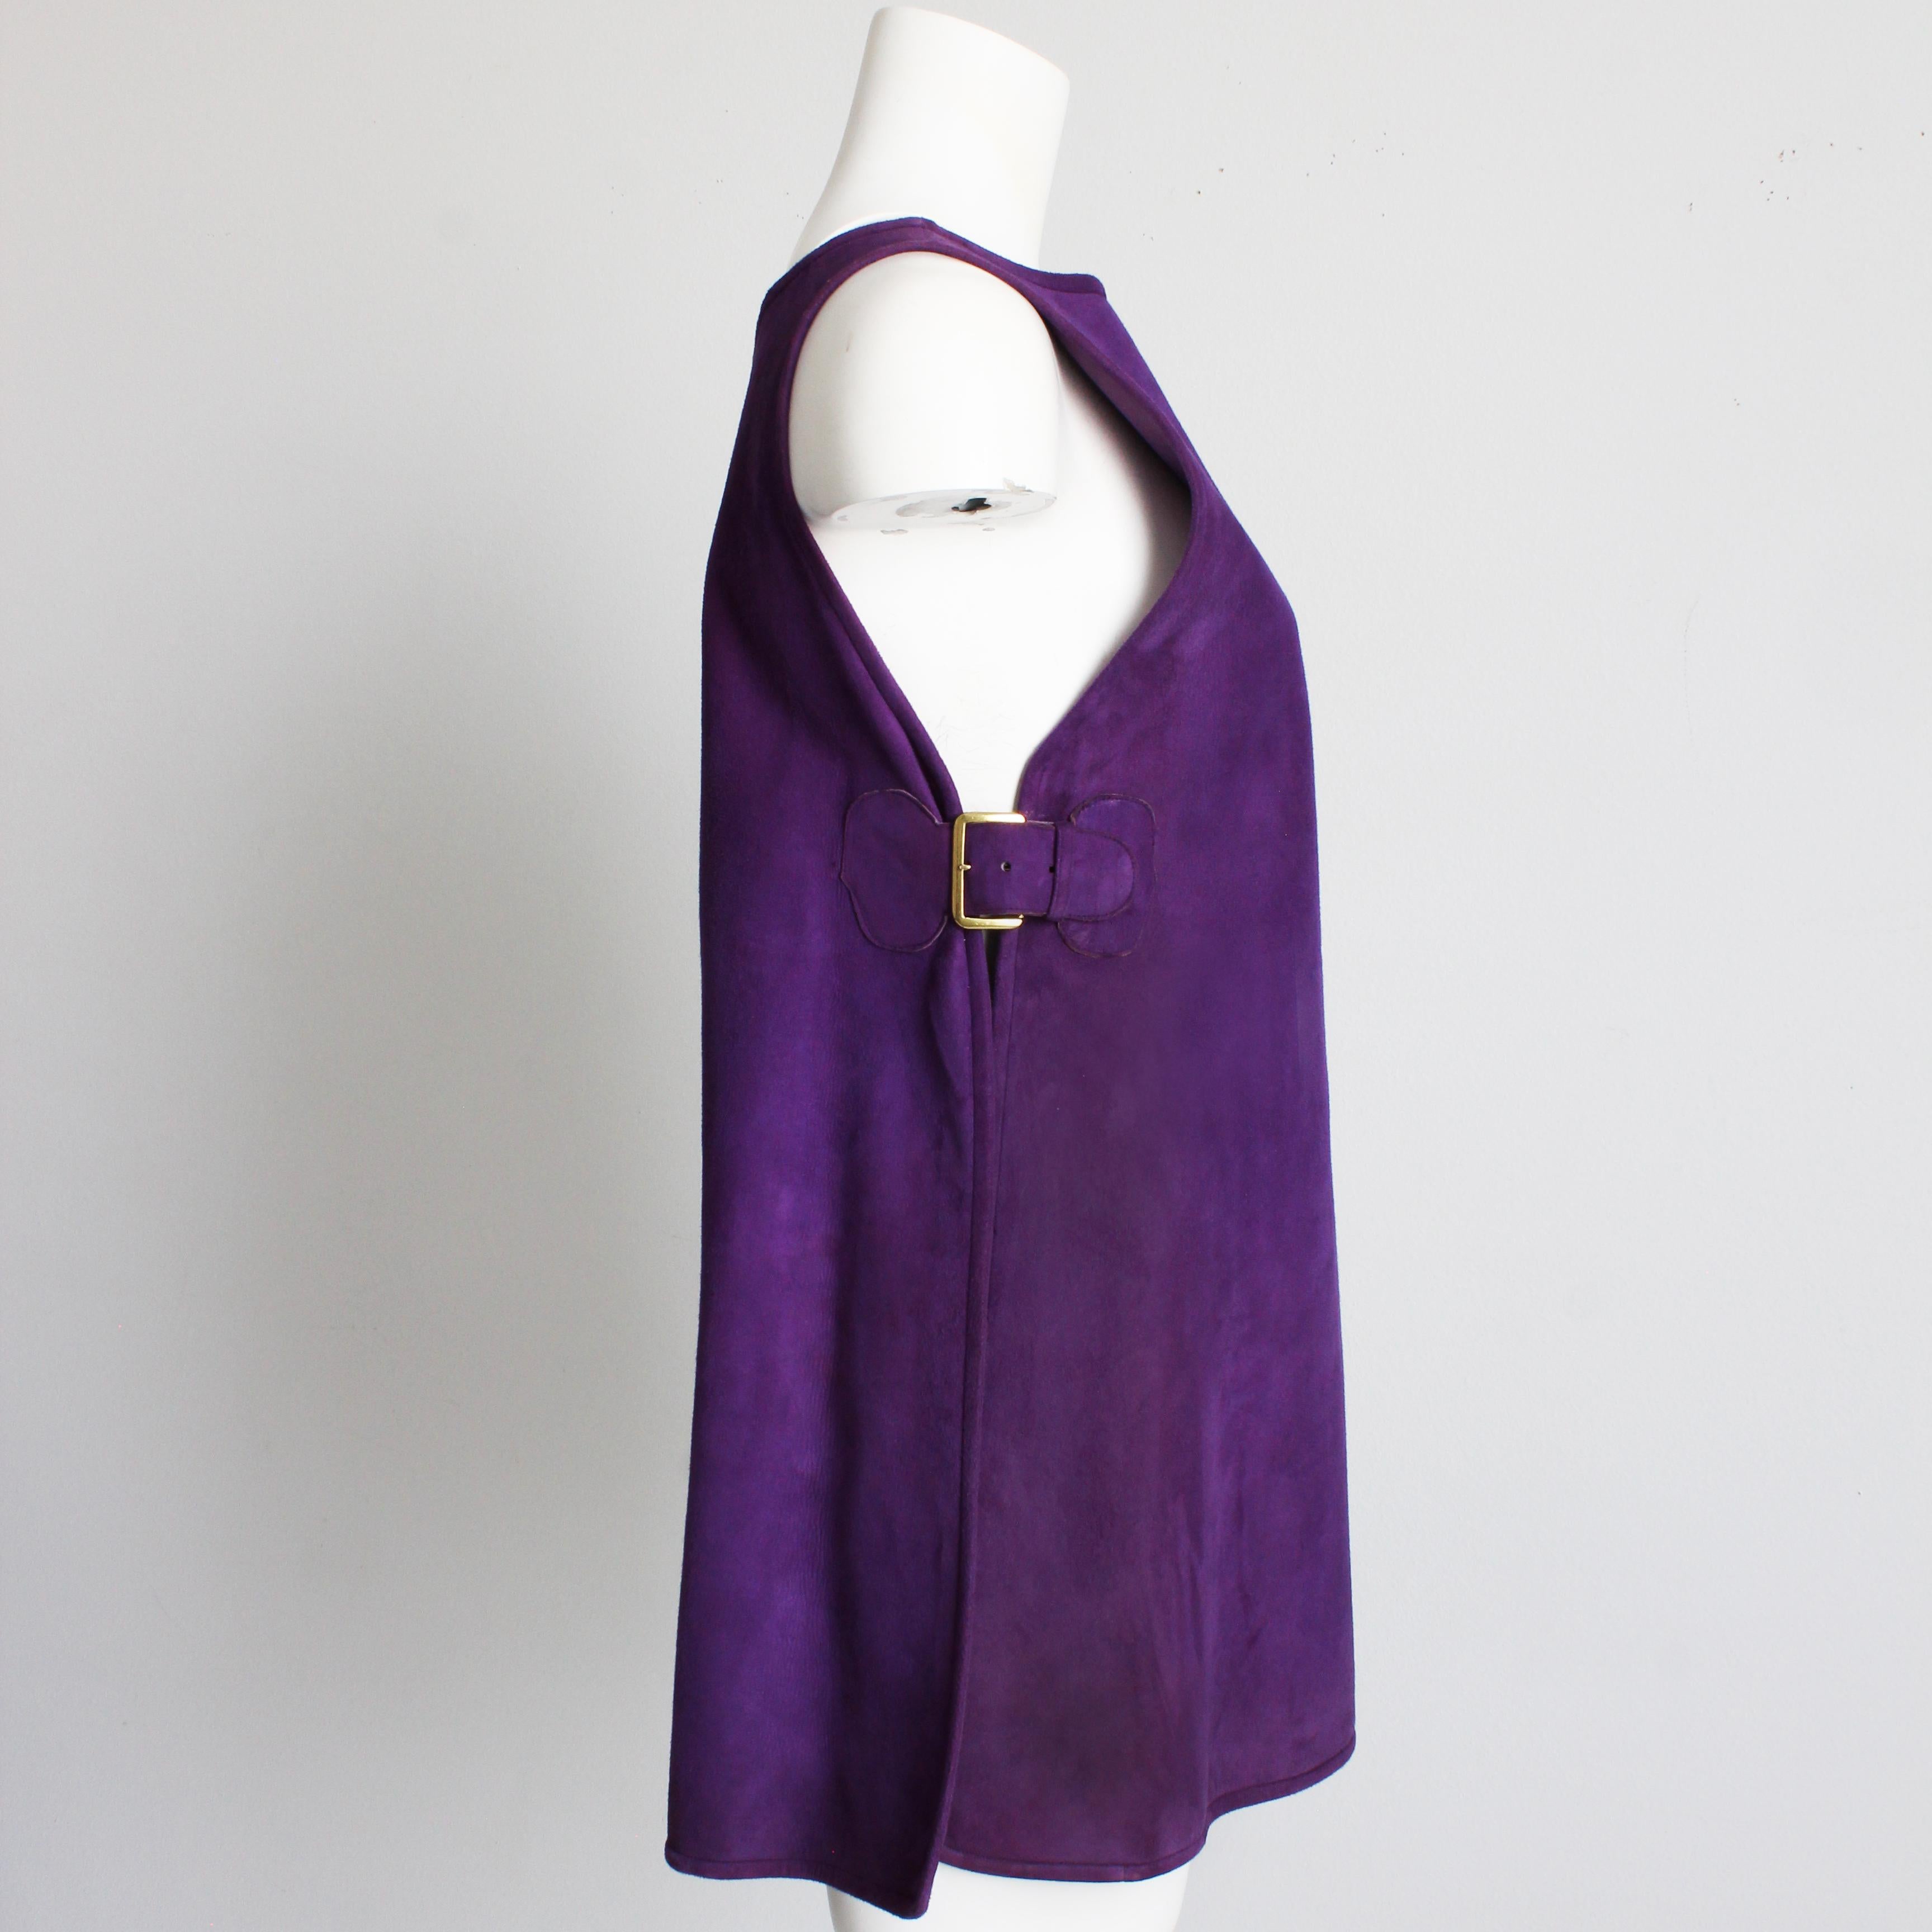 Bonnie Cashin for Sills Tunic Dress Lilac Suede Saks 5th Ave Vintage 60s NOS NWT For Sale 1